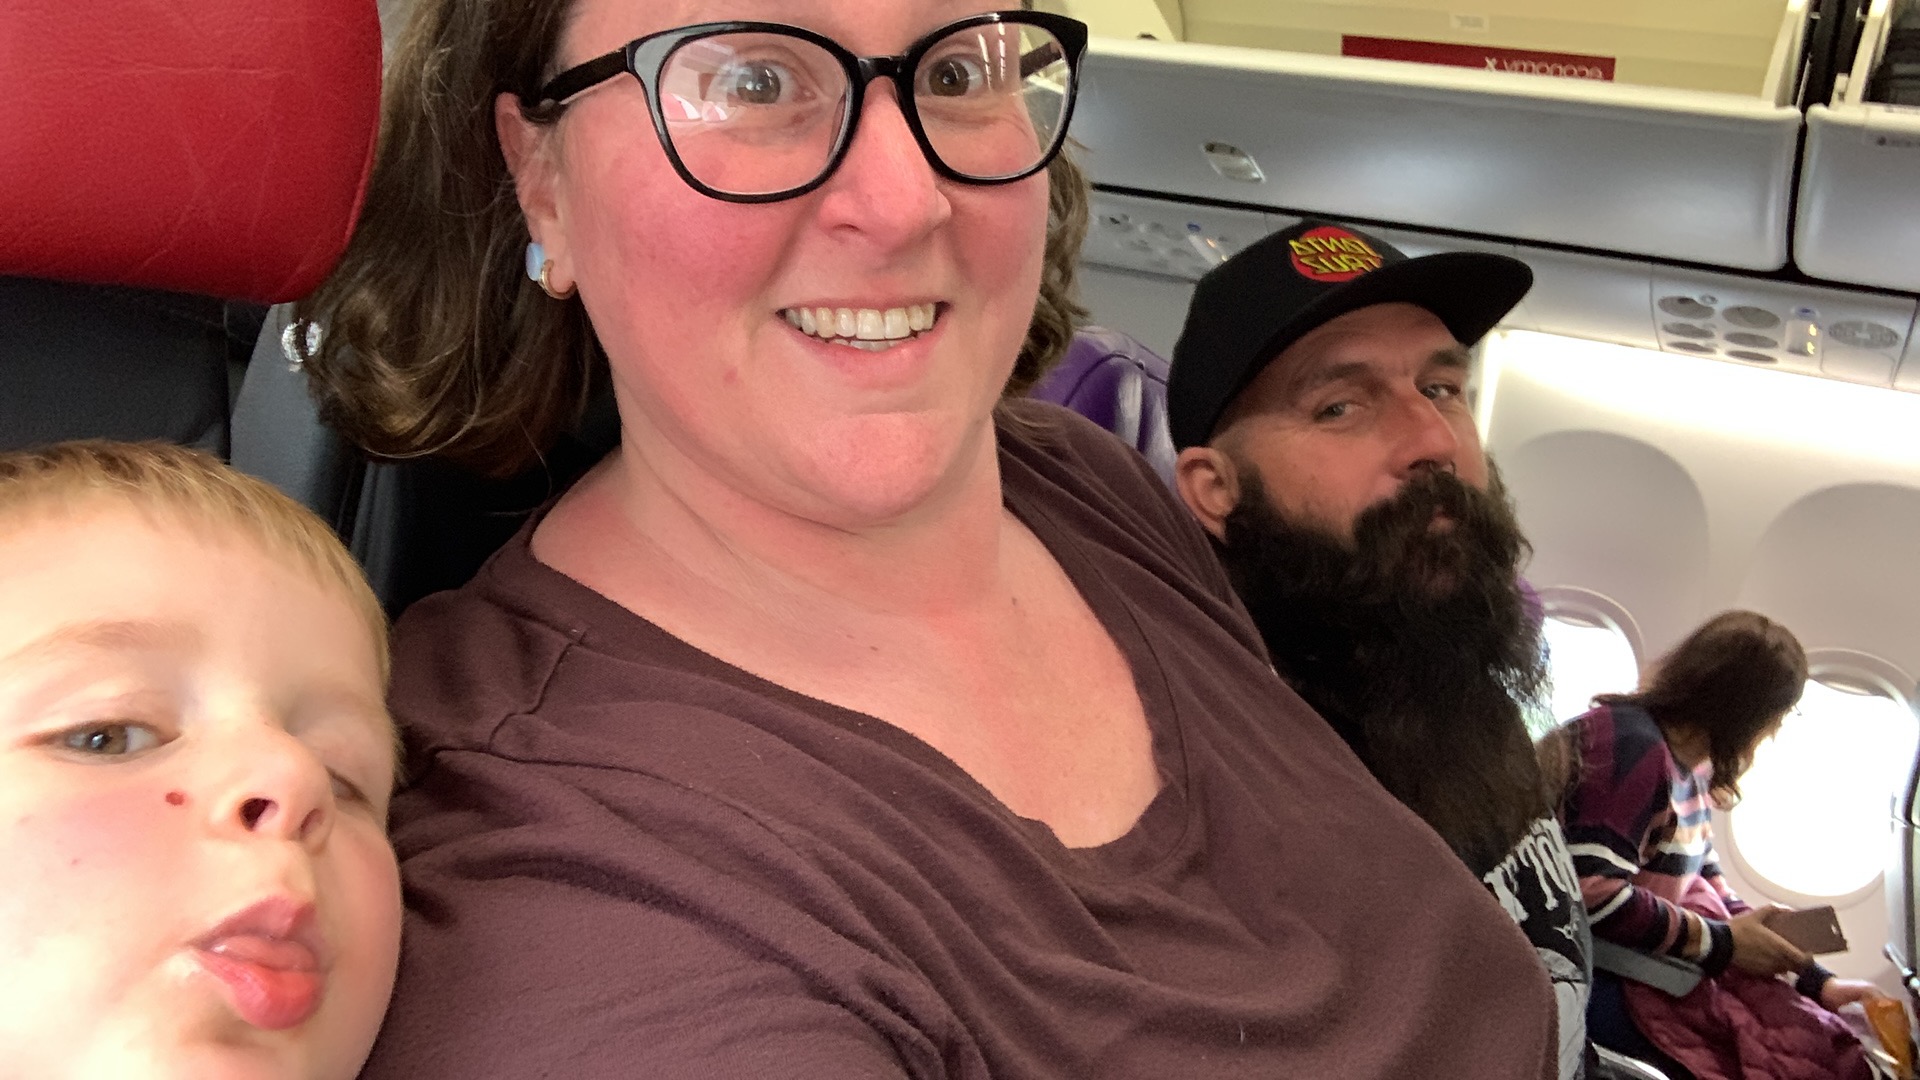 A child, woman and man sitting on a plane smile for a selfie